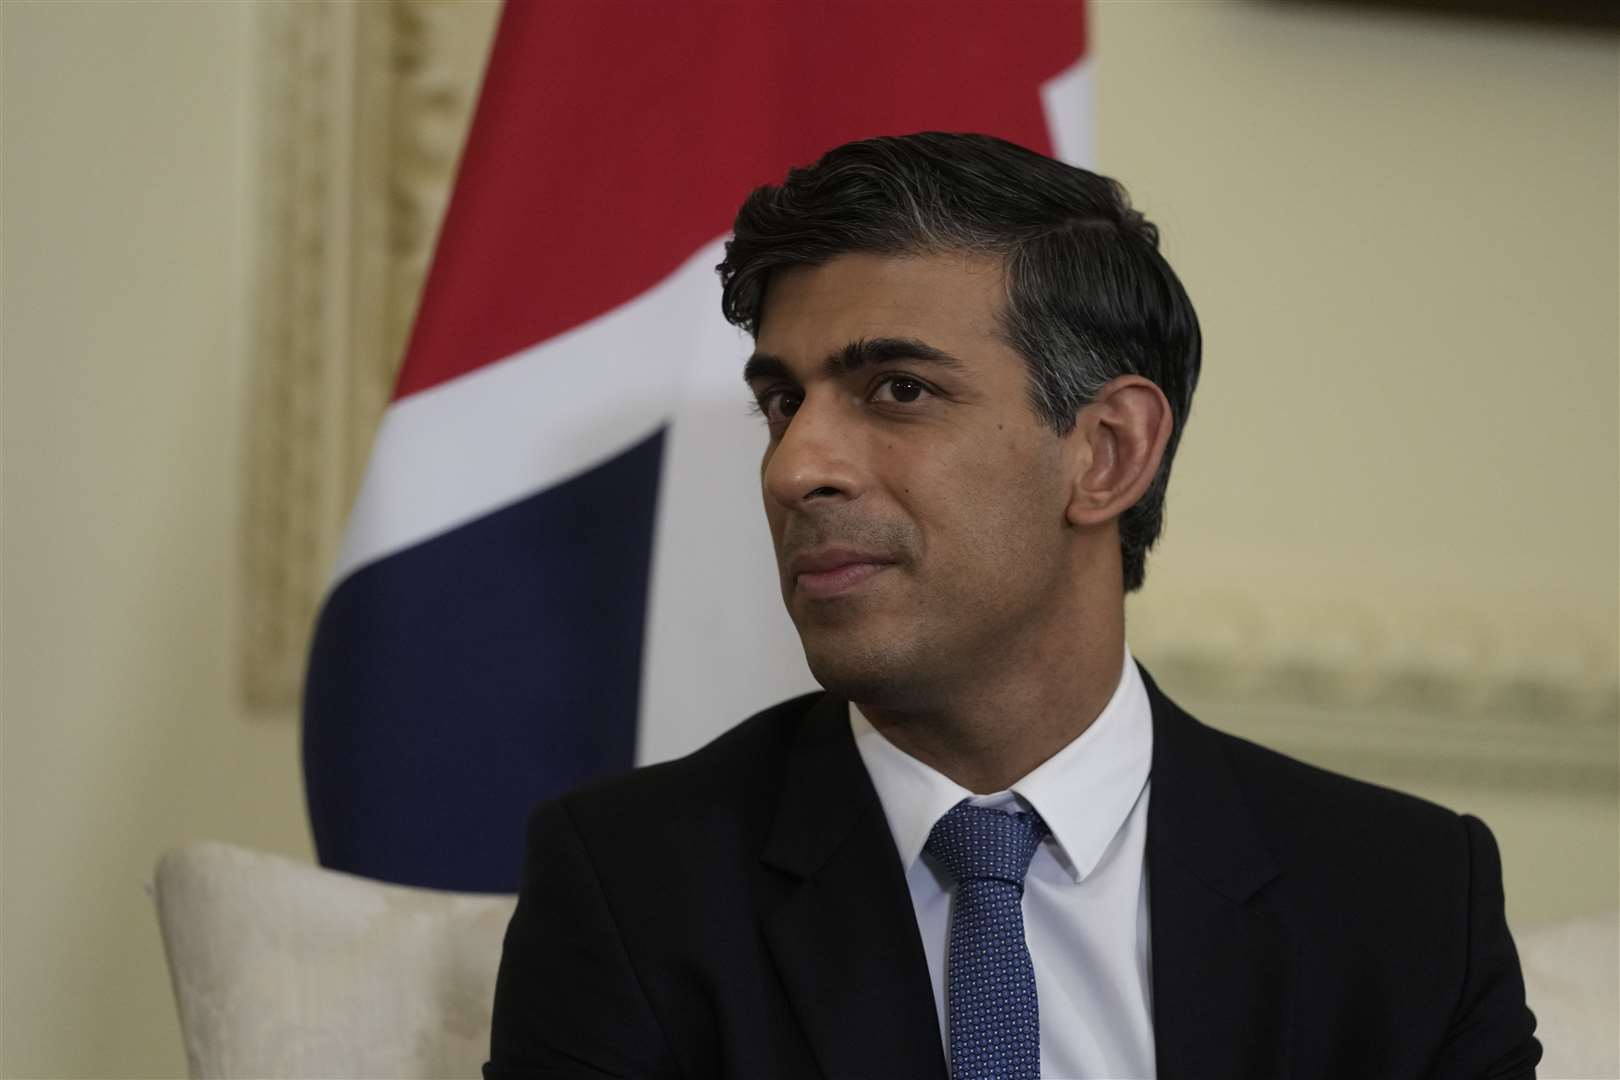 Prime Minister Rishi Sunak’s meeting with the Greek leader was unexpectedly cancelled (Kin Cheung/PA)